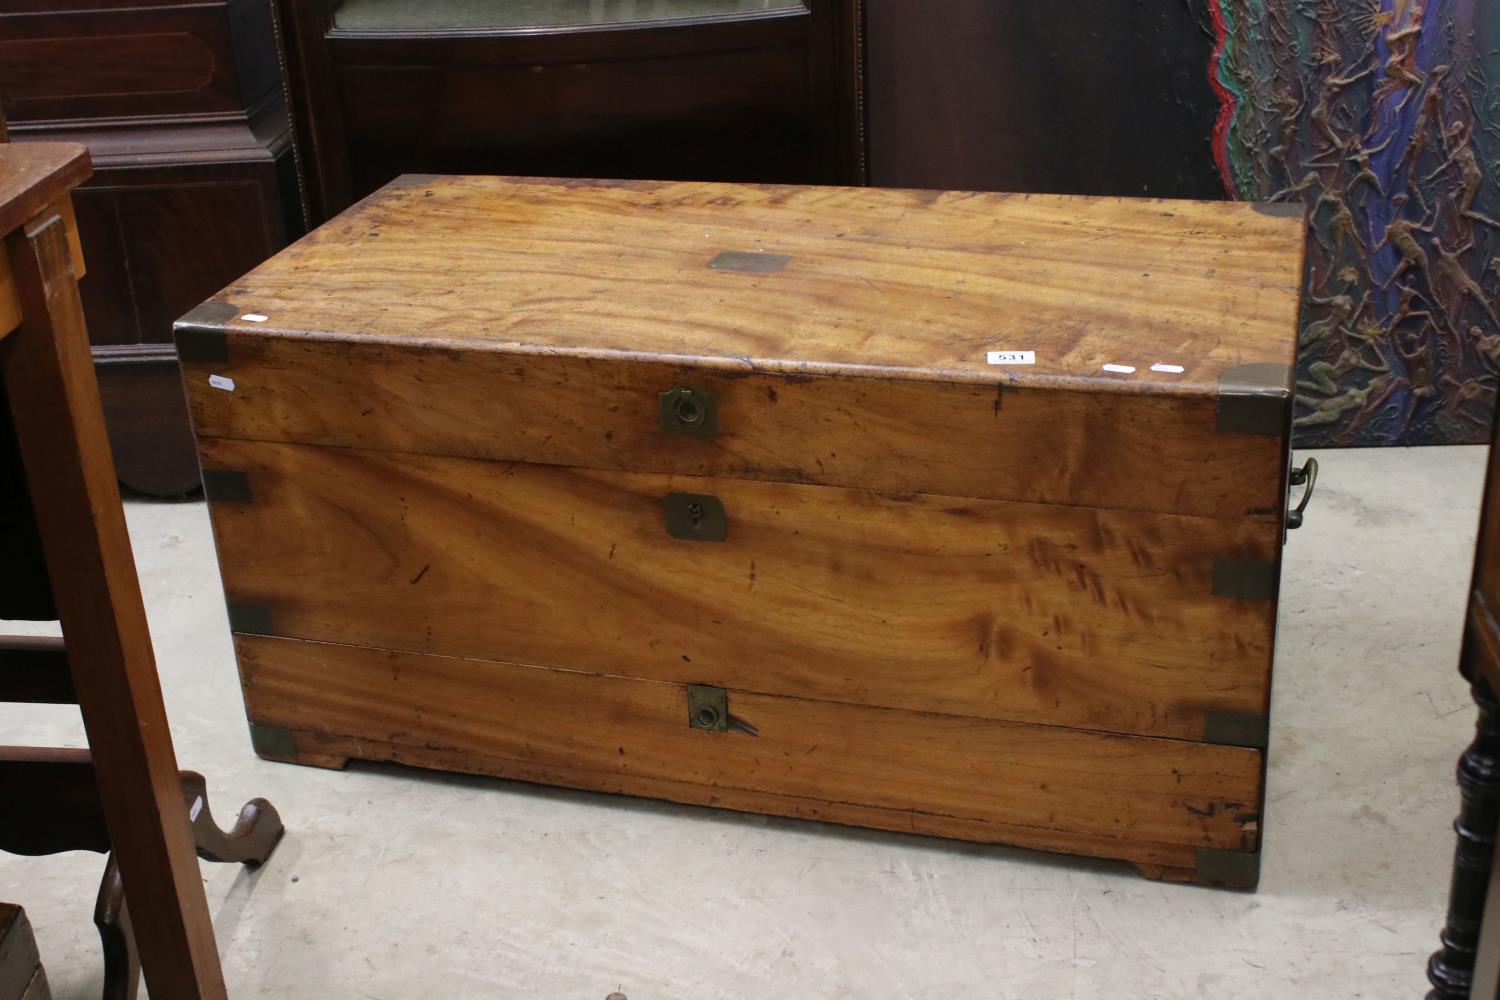 19th century Camphorwood and Brass Bound Blanket Chest with Brass Carrying Handles, 100cms long x